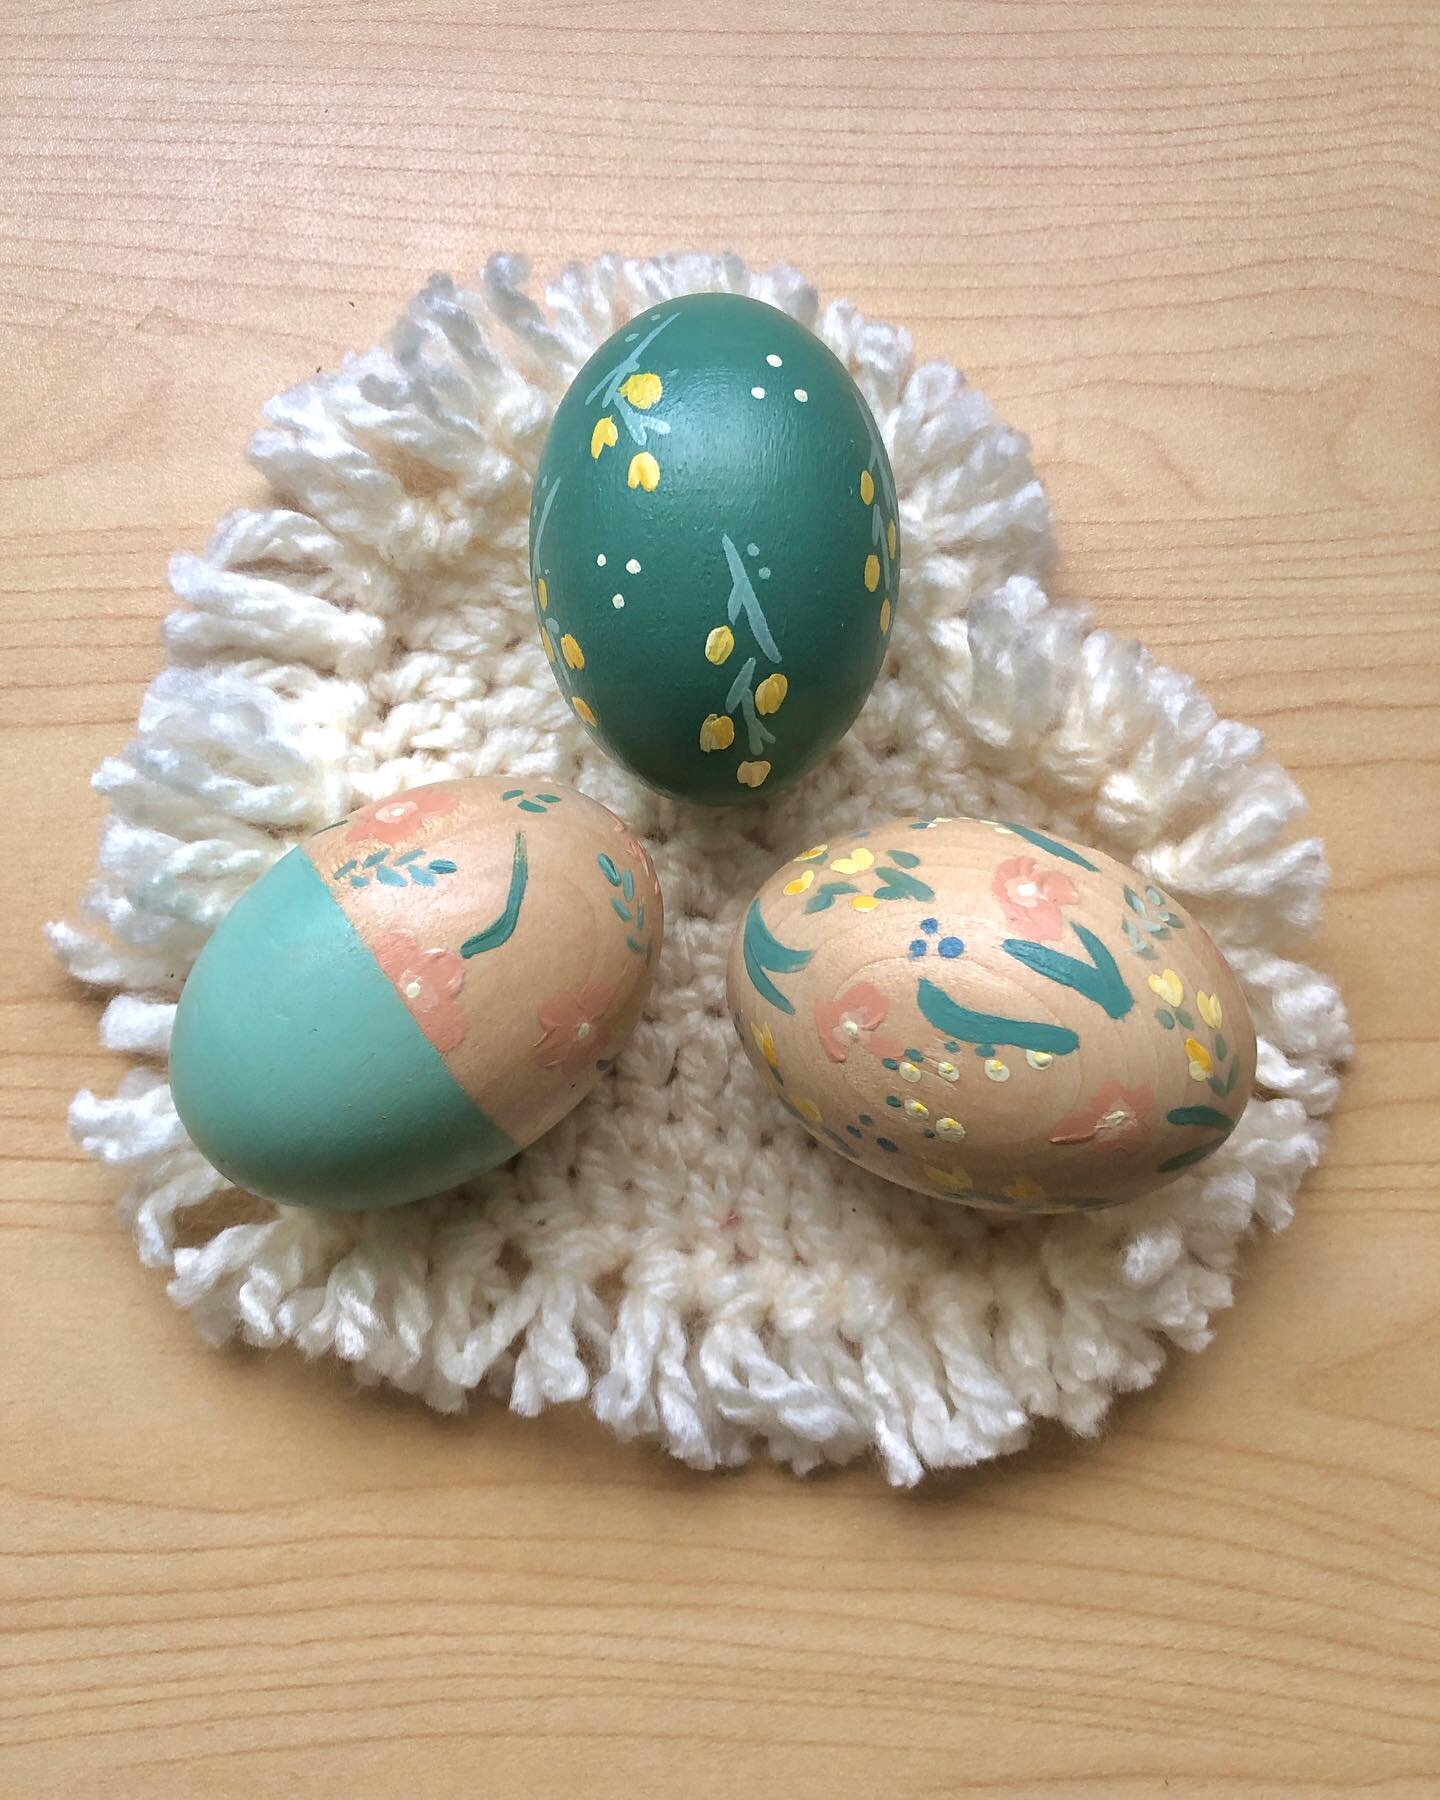 I painted these for YOU. Put them in a little nest or bowl to decorate your home for Spring, add them to your Easter table, or gift them to someone who needs a little reminder of joy. 

🐣 shop here : https://monilynndesigns.etsy.com/listing/16811155